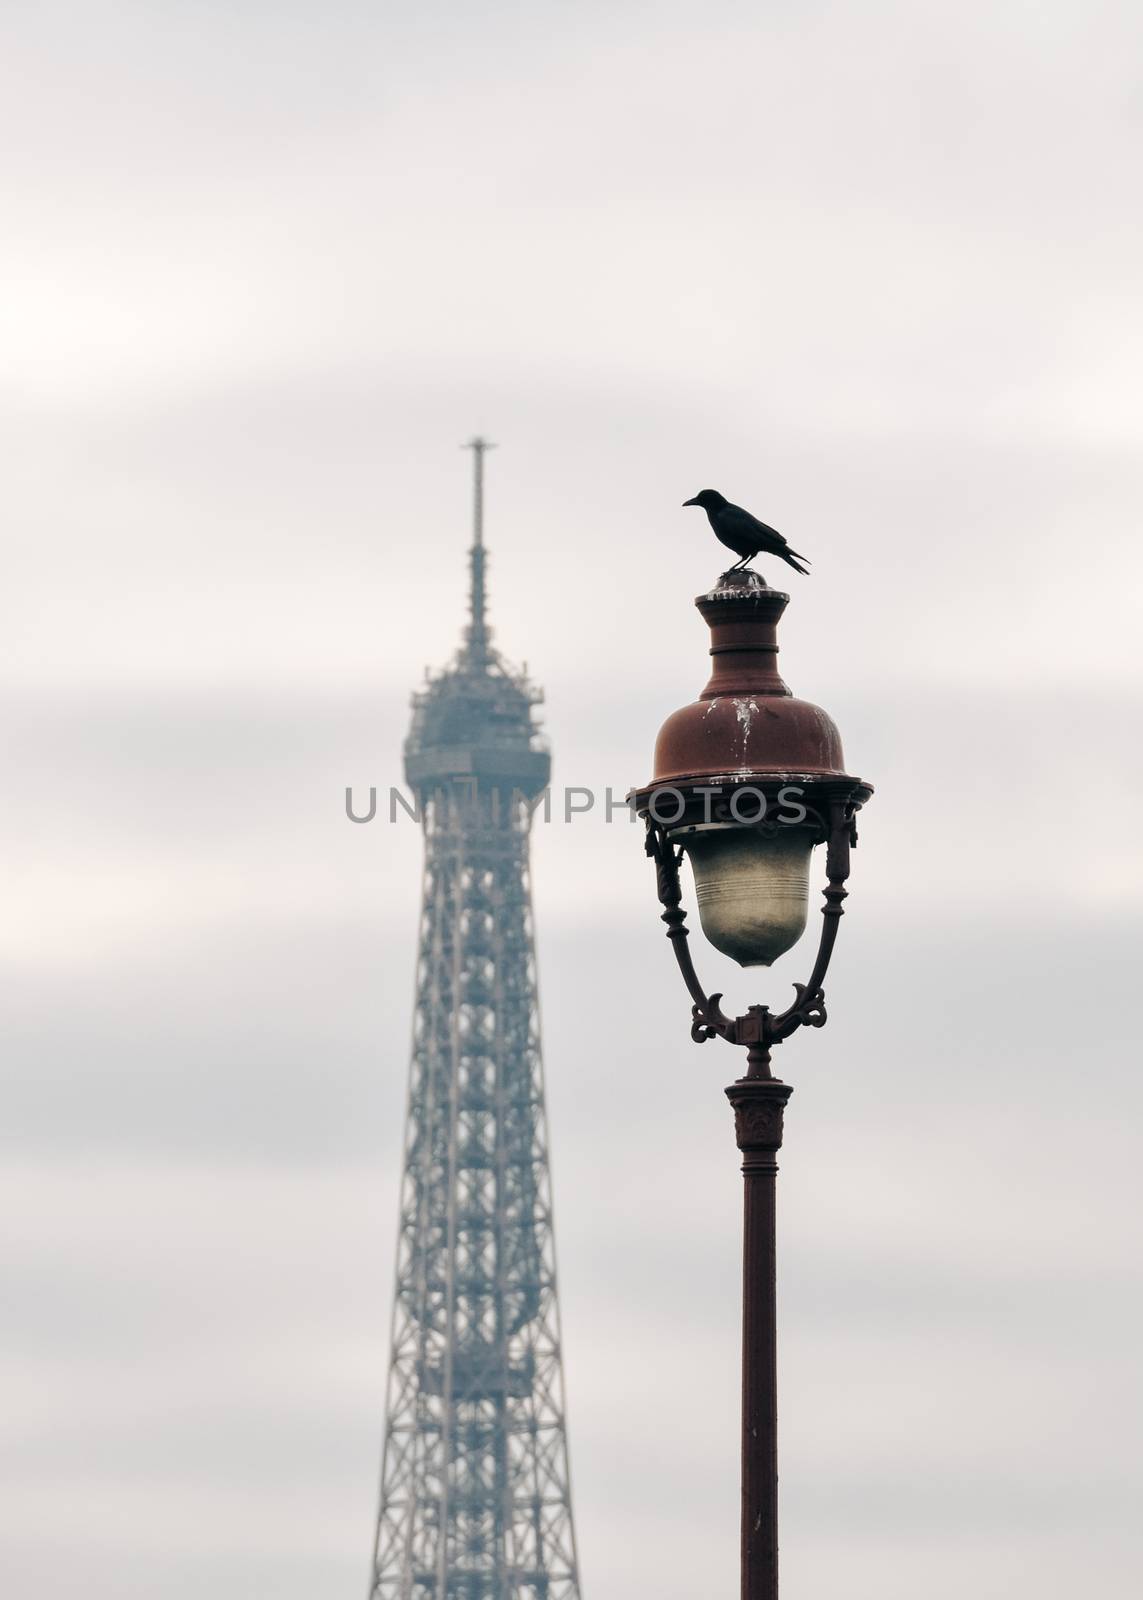 A raven on top of street light, the Eiffel Tower in the background in Paris, France